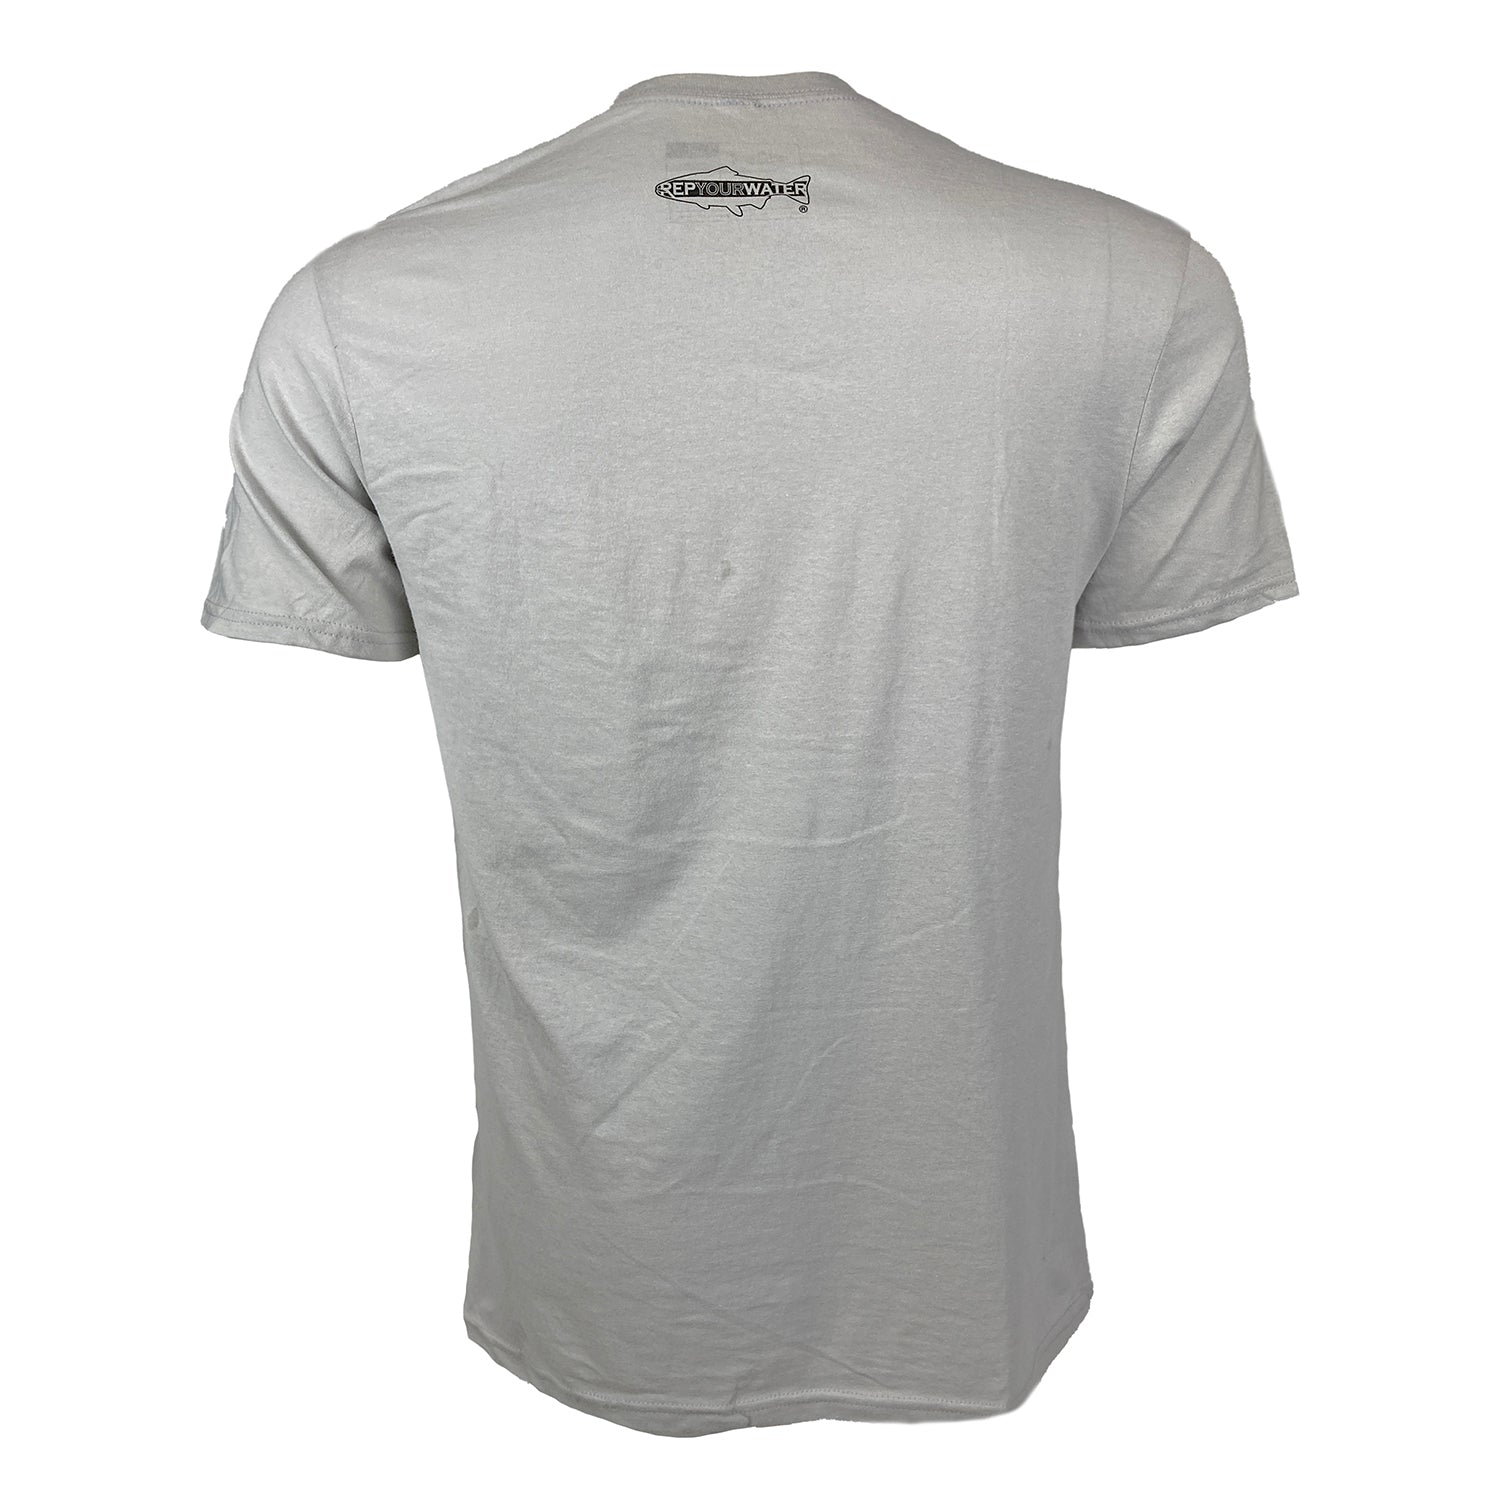 Gray tee shown from the back with Rep Your Water logo just below the neck line.